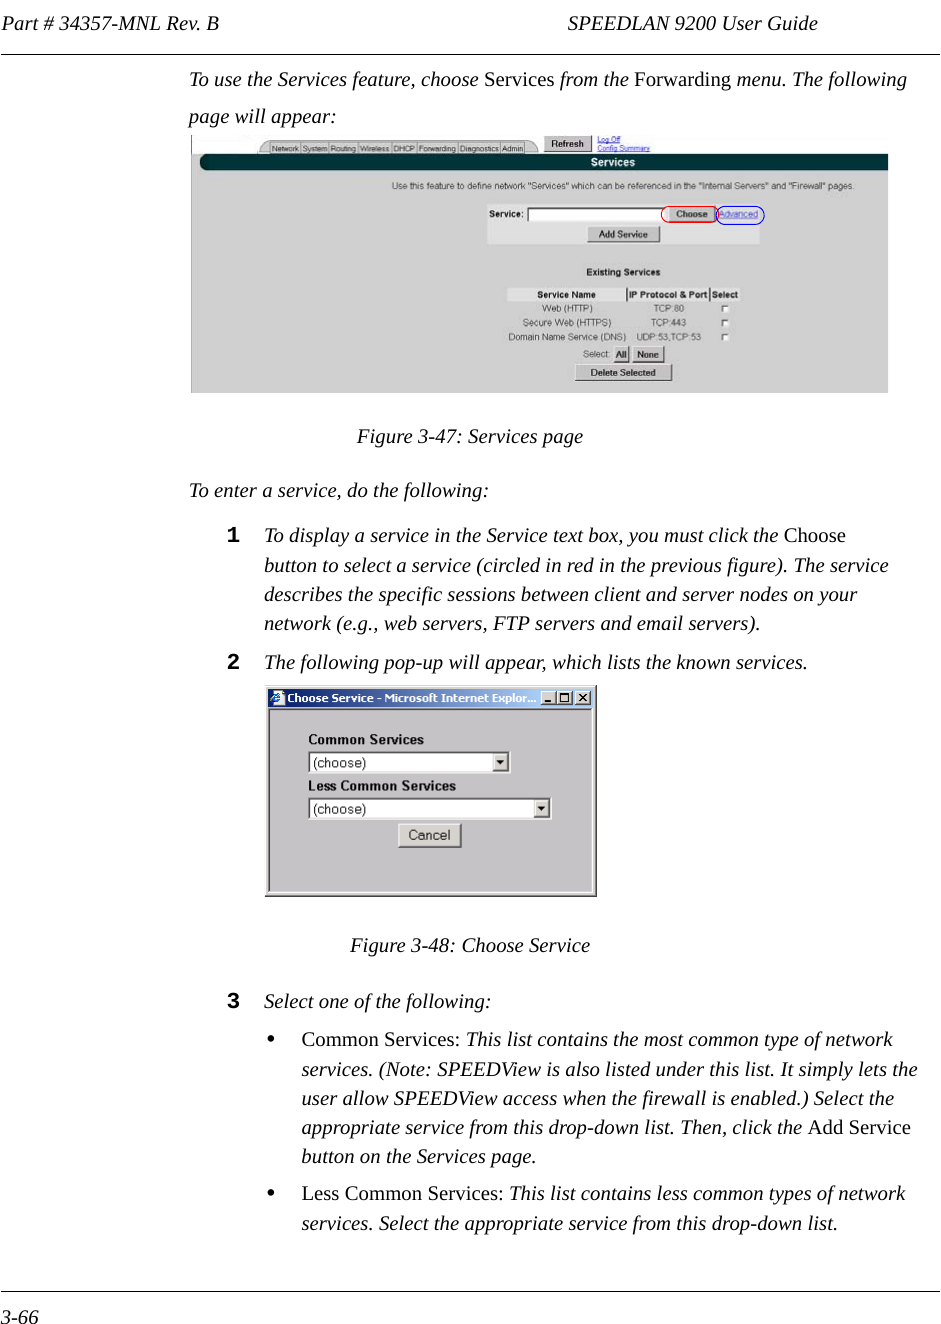 Part # 34357-MNL Rev. B                                                                   SPEEDLAN 9200 User Guide 3-66To use the Services feature, choose Services from the Forwarding menu. The following page will appear:Figure 3-47: Services pageTo enter a service, do the following:1To display a service in the Service text box, you must click the Choose button to select a service (circled in red in the previous figure). The service describes the specific sessions between client and server nodes on yournetwork (e.g., web servers, FTP servers and email servers).2The following pop-up will appear, which lists the known services. Figure 3-48: Choose Service3Select one of the following:•Common Services: This list contains the most common type of network services. (Note: SPEEDView is also listed under this list. It simply lets the user allow SPEEDView access when the firewall is enabled.) Select the appropriate service from this drop-down list. Then, click the Add Service button on the Services page.  •Less Common Services: This list contains less common types of network services. Select the appropriate service from this drop-down list. 